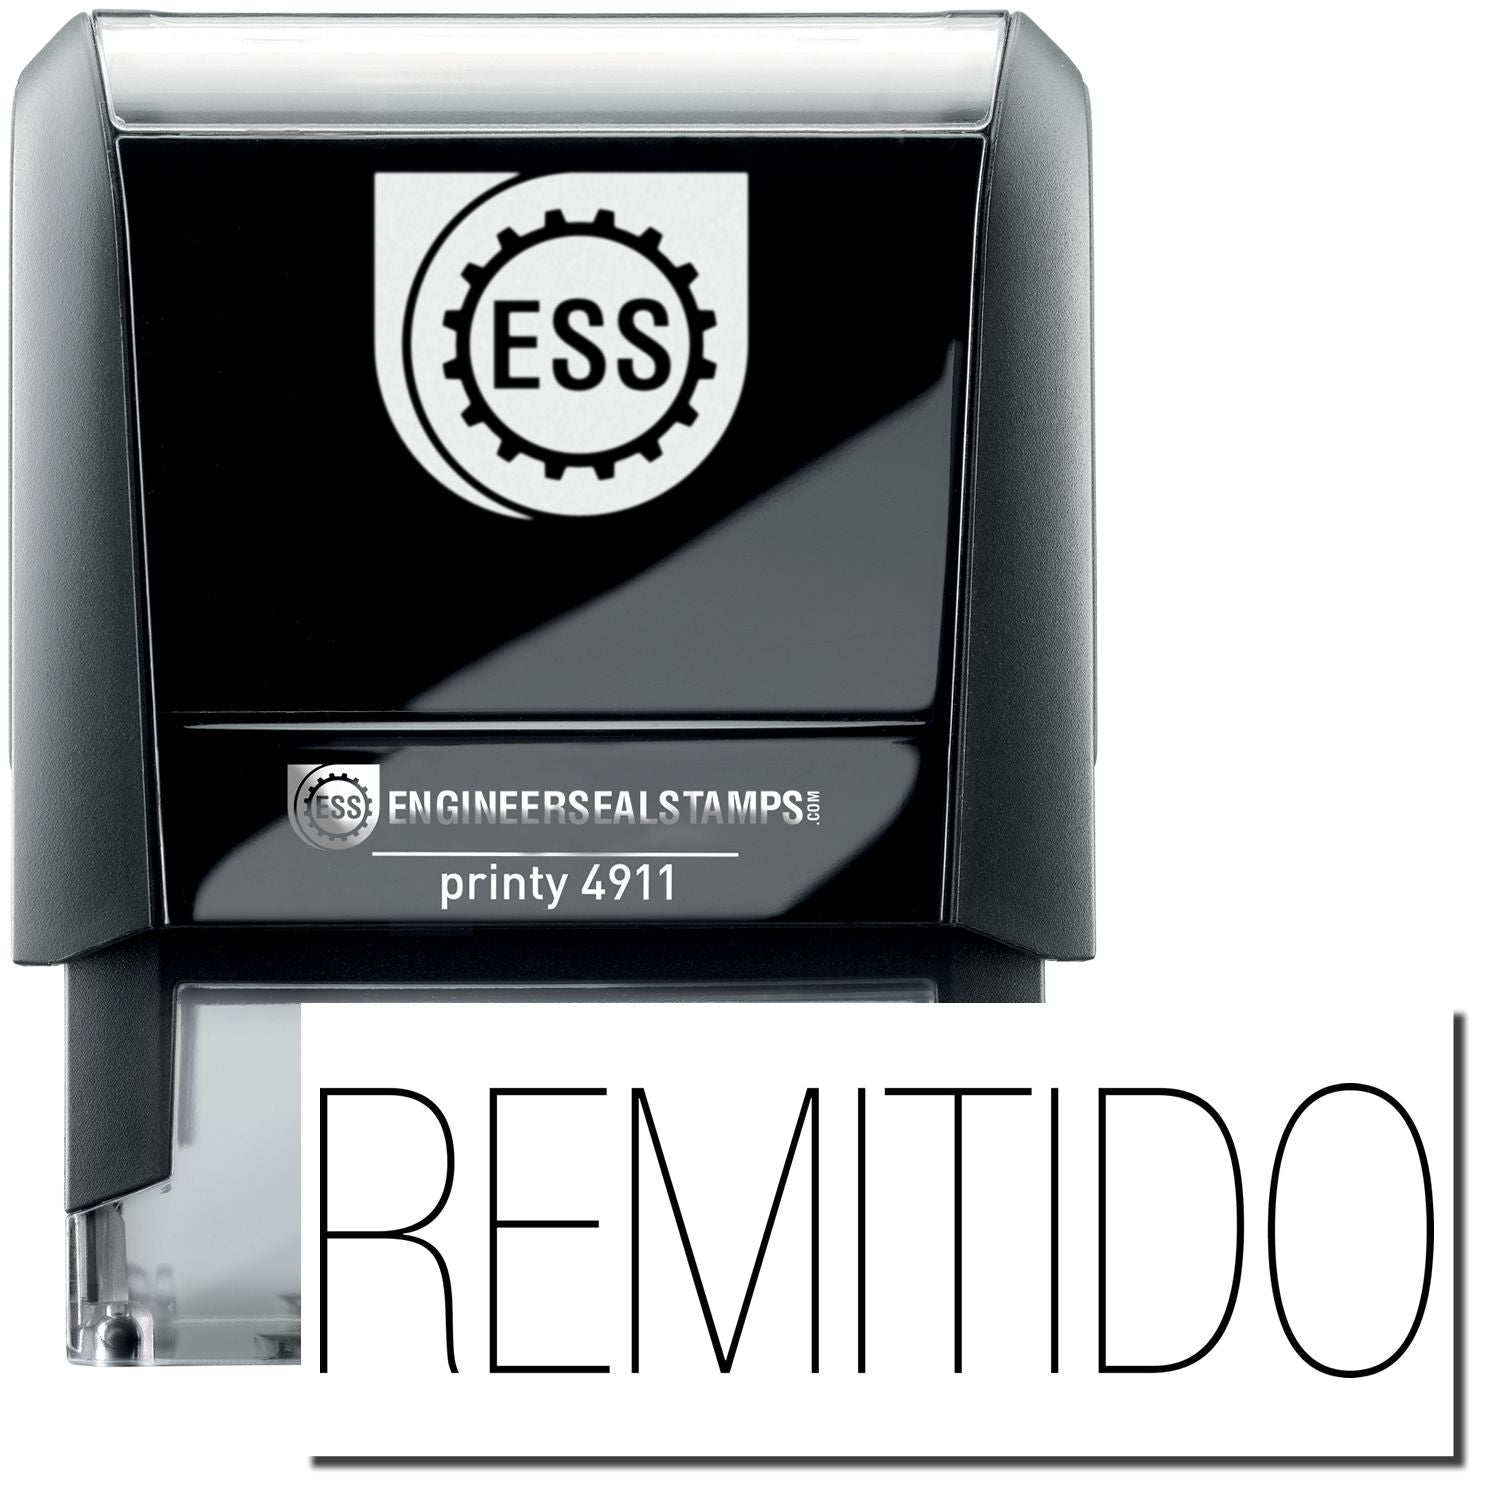 A self-inking stamp with a stamped image showing how the text "REMITIDO" is displayed after stamping.